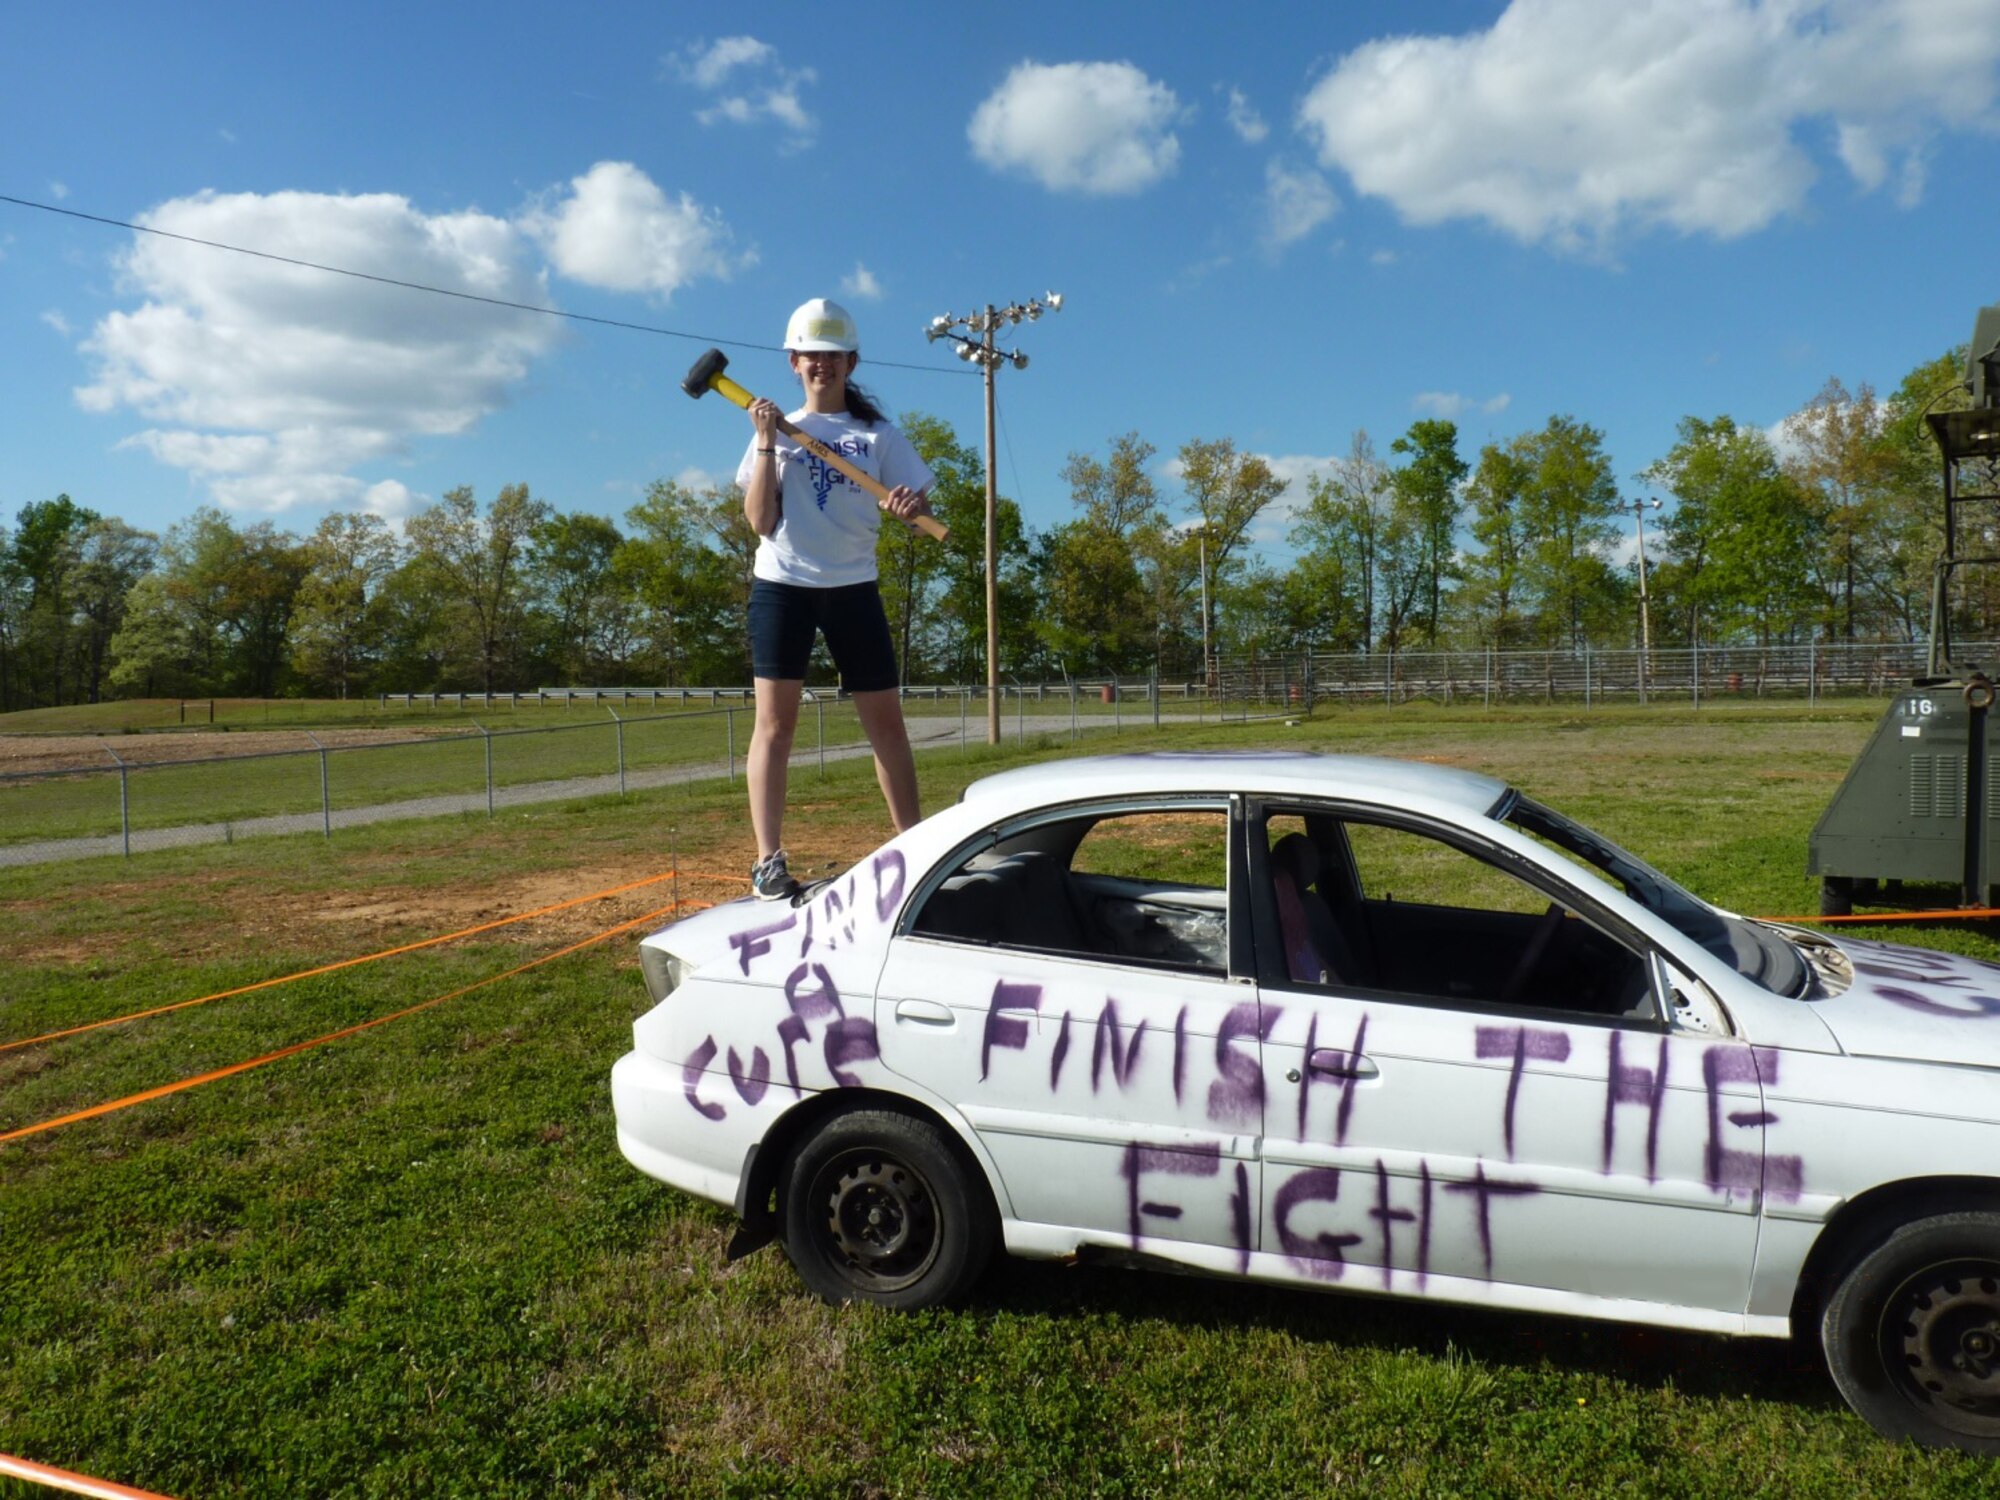 Amber Wolfe, the daughter of AEDC employee Dee and Shawn Wolfe, prepares to smash cancer by damaging a car that represents cancer at the 2014 Relay For Life in Manchester. The “Smashing Car” is a fundraiser event for team REMEMBER at the relay. (Photo provided)